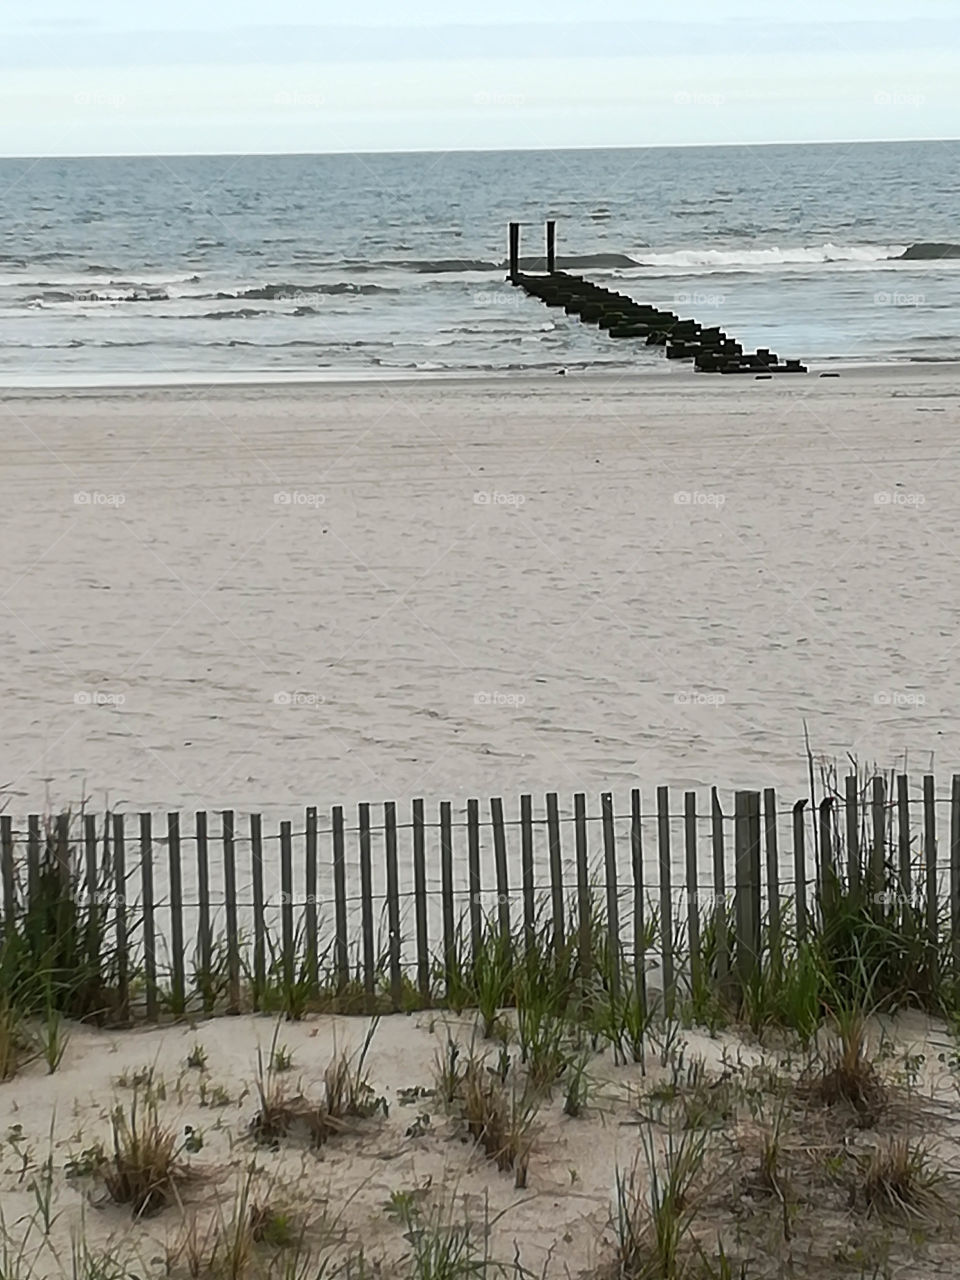 Remains of a Pier after it was destroyed by Hurricane Sandy